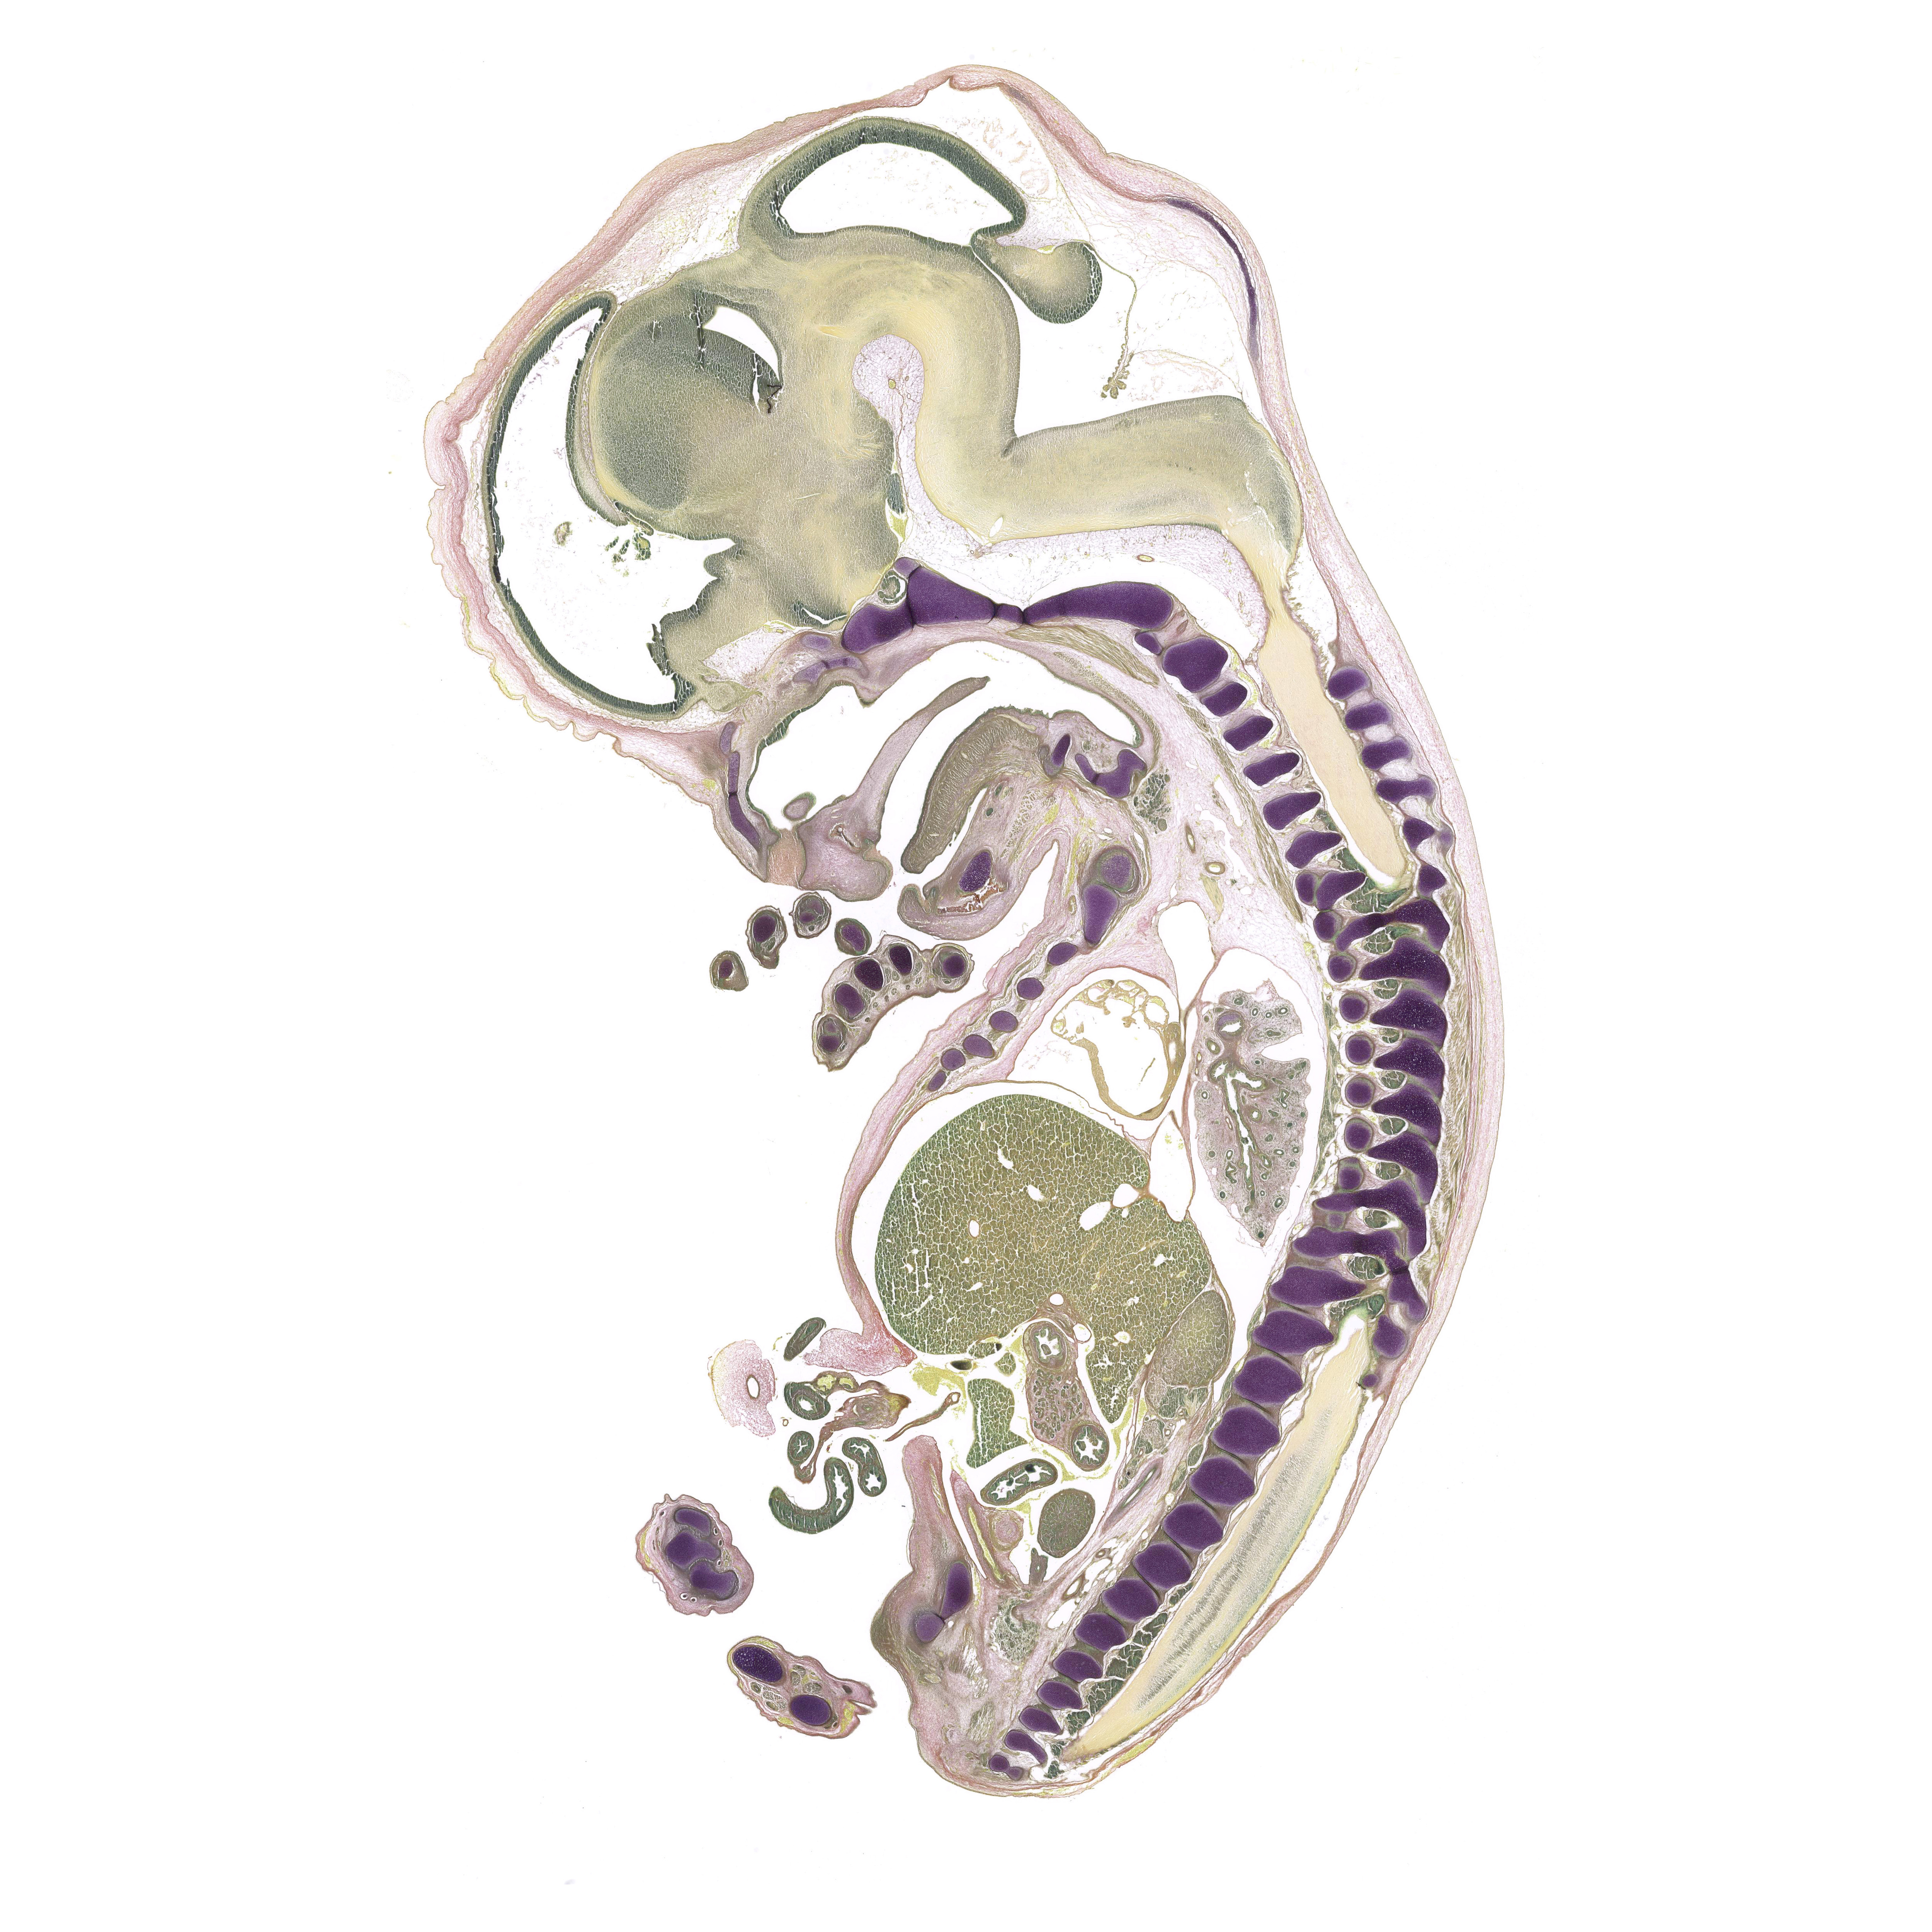 A pentachrome stained section of a human embryo